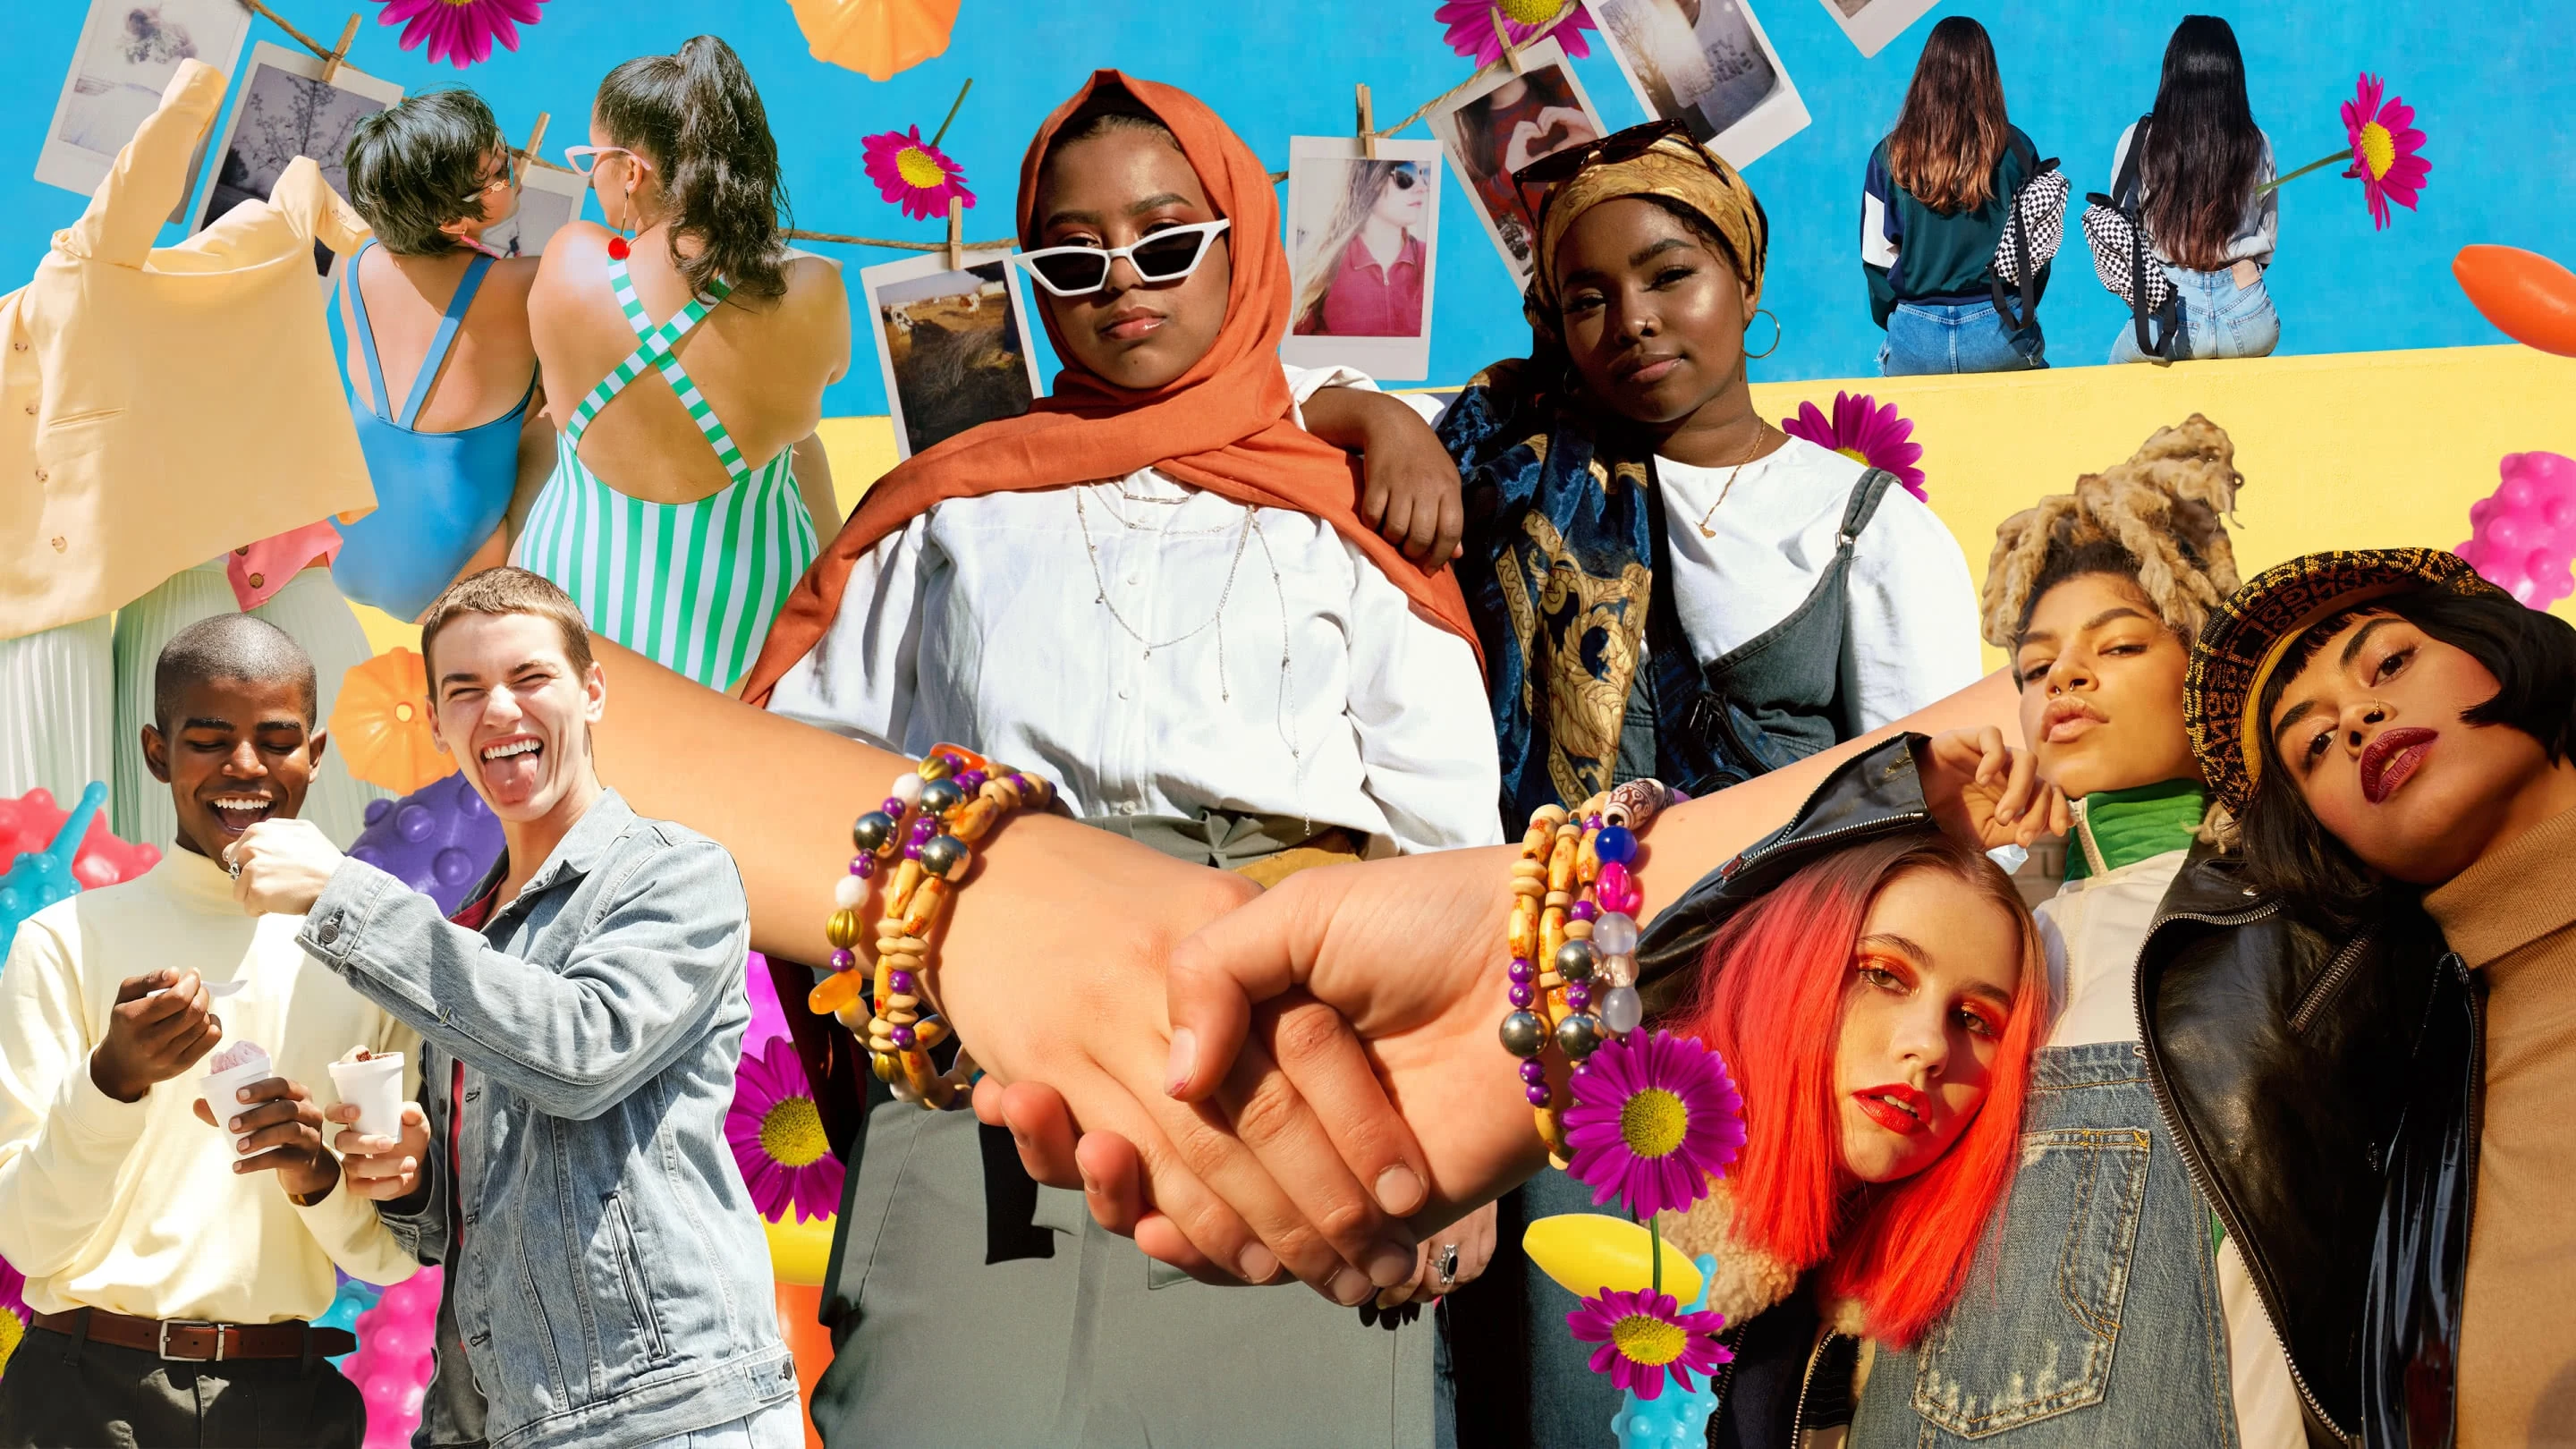 Colourful collage of friends of different races and ethnicities. There's a handshake in the centre, with bright flowers and shapes in the background.